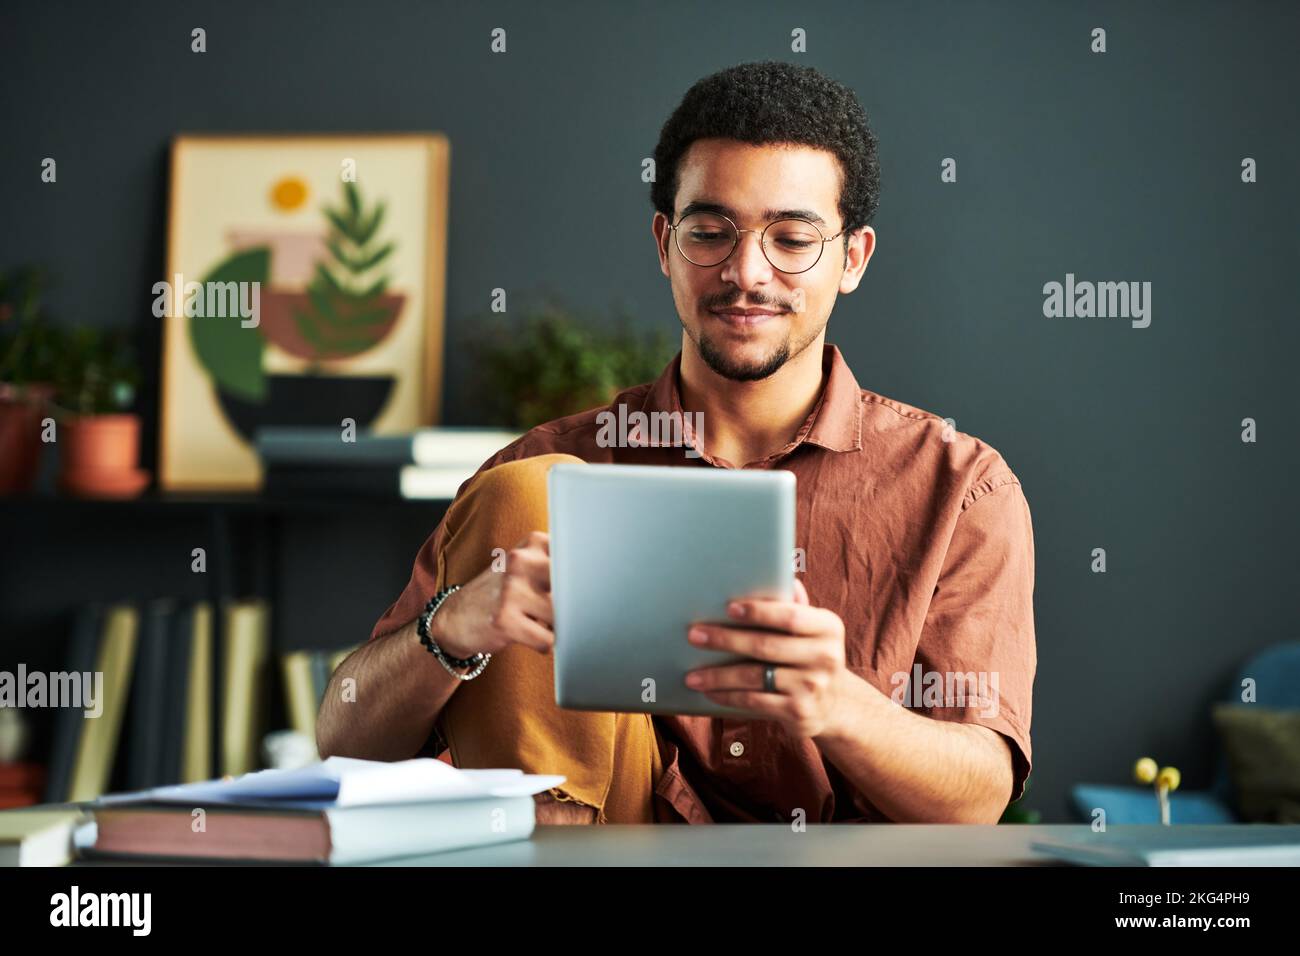 Young Middle Eastern male student looking through online information on screen of tablet while sitting by workplace with books Stock Photo